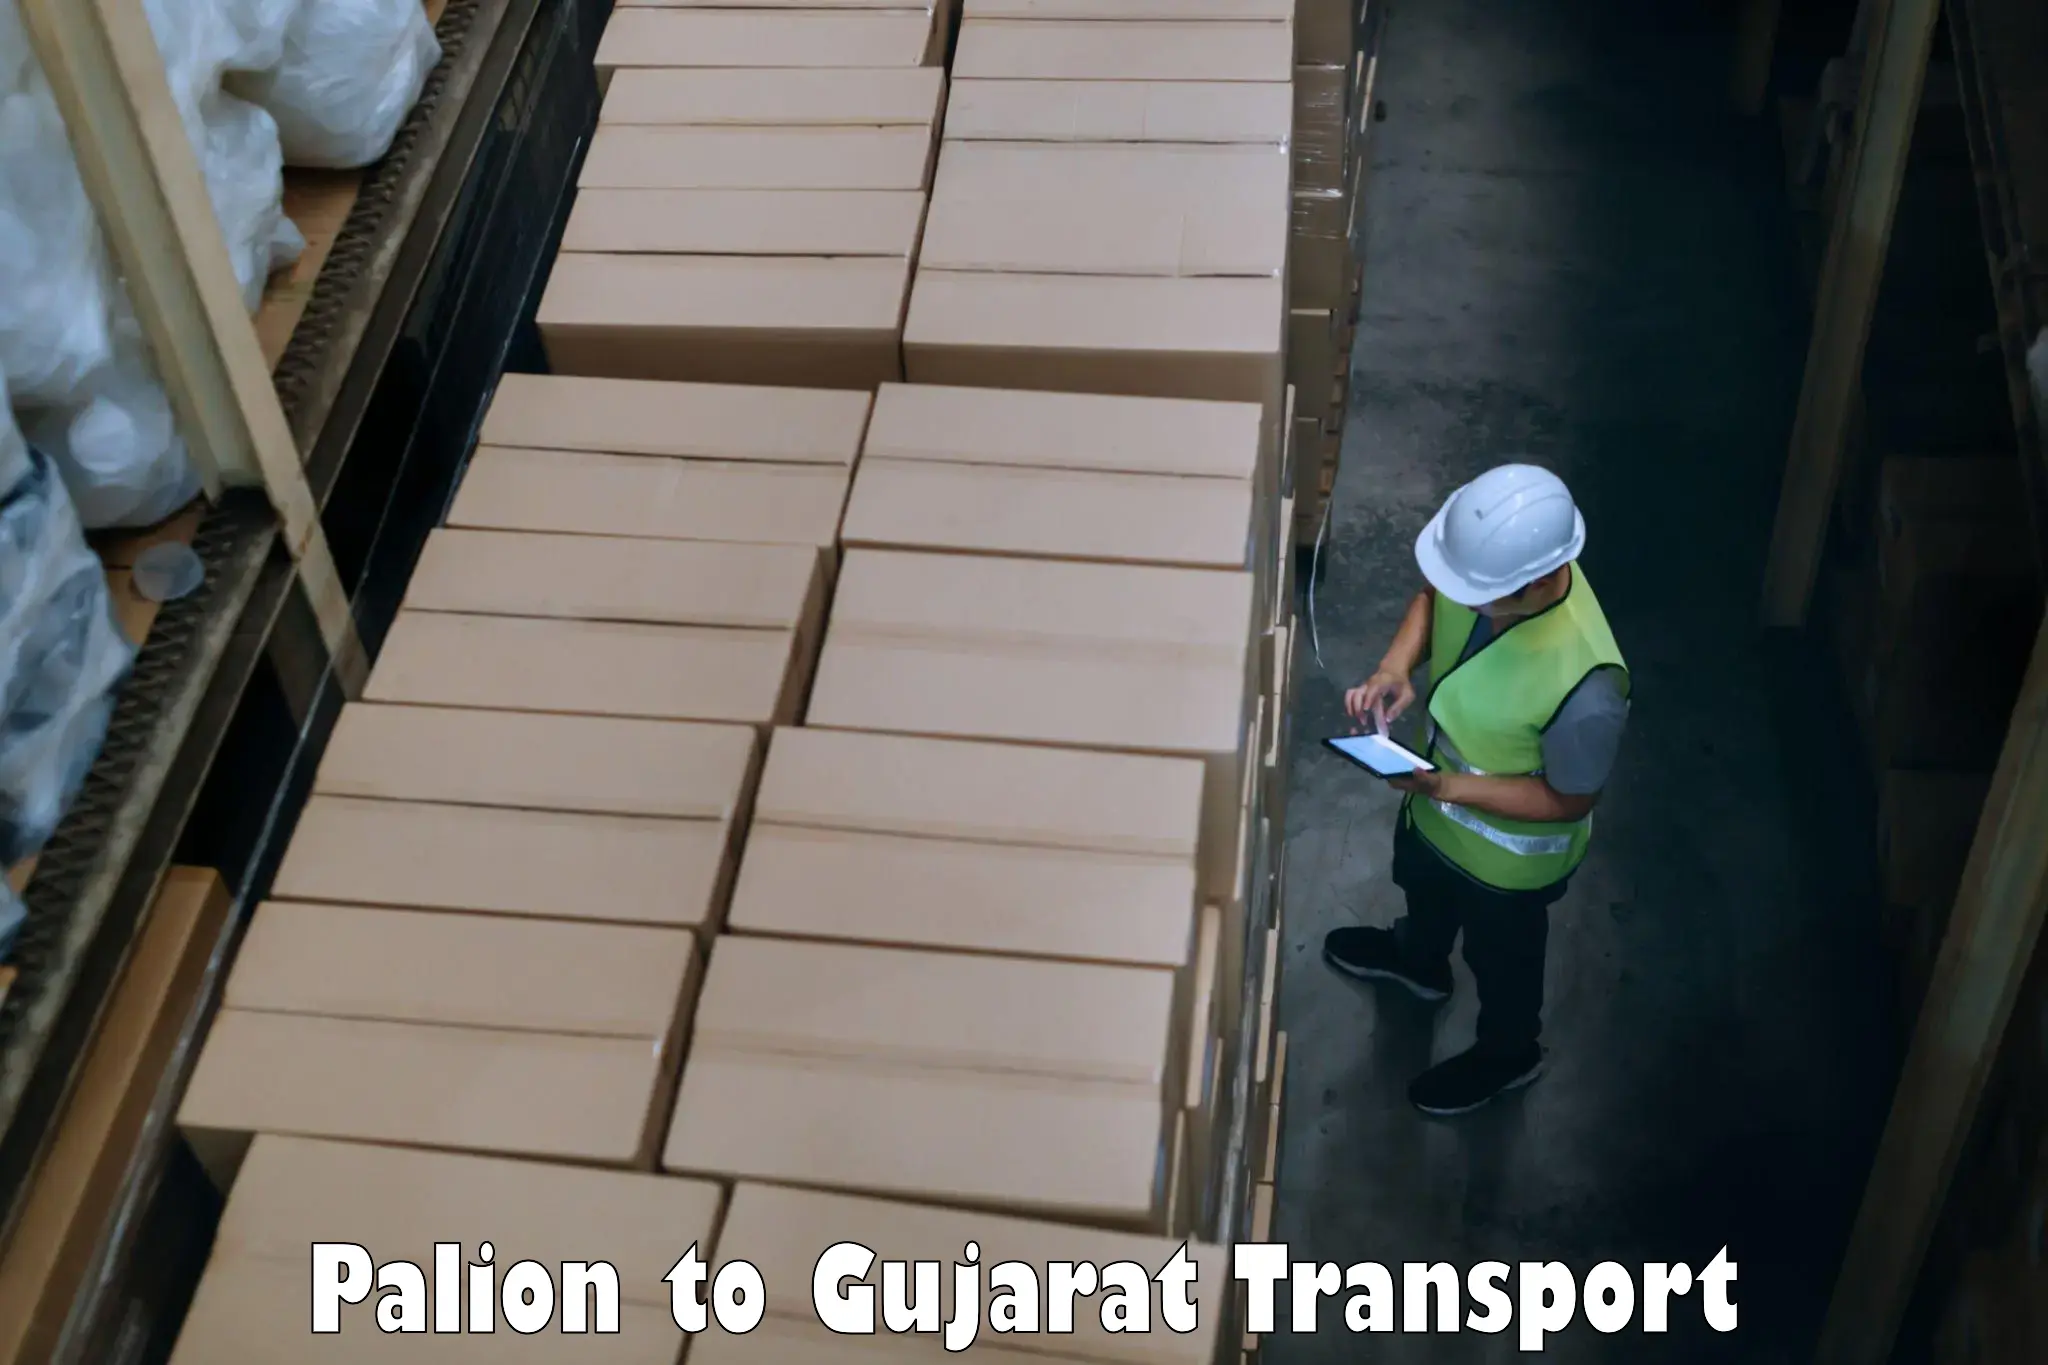 Transport shared services Palion to Gujarat